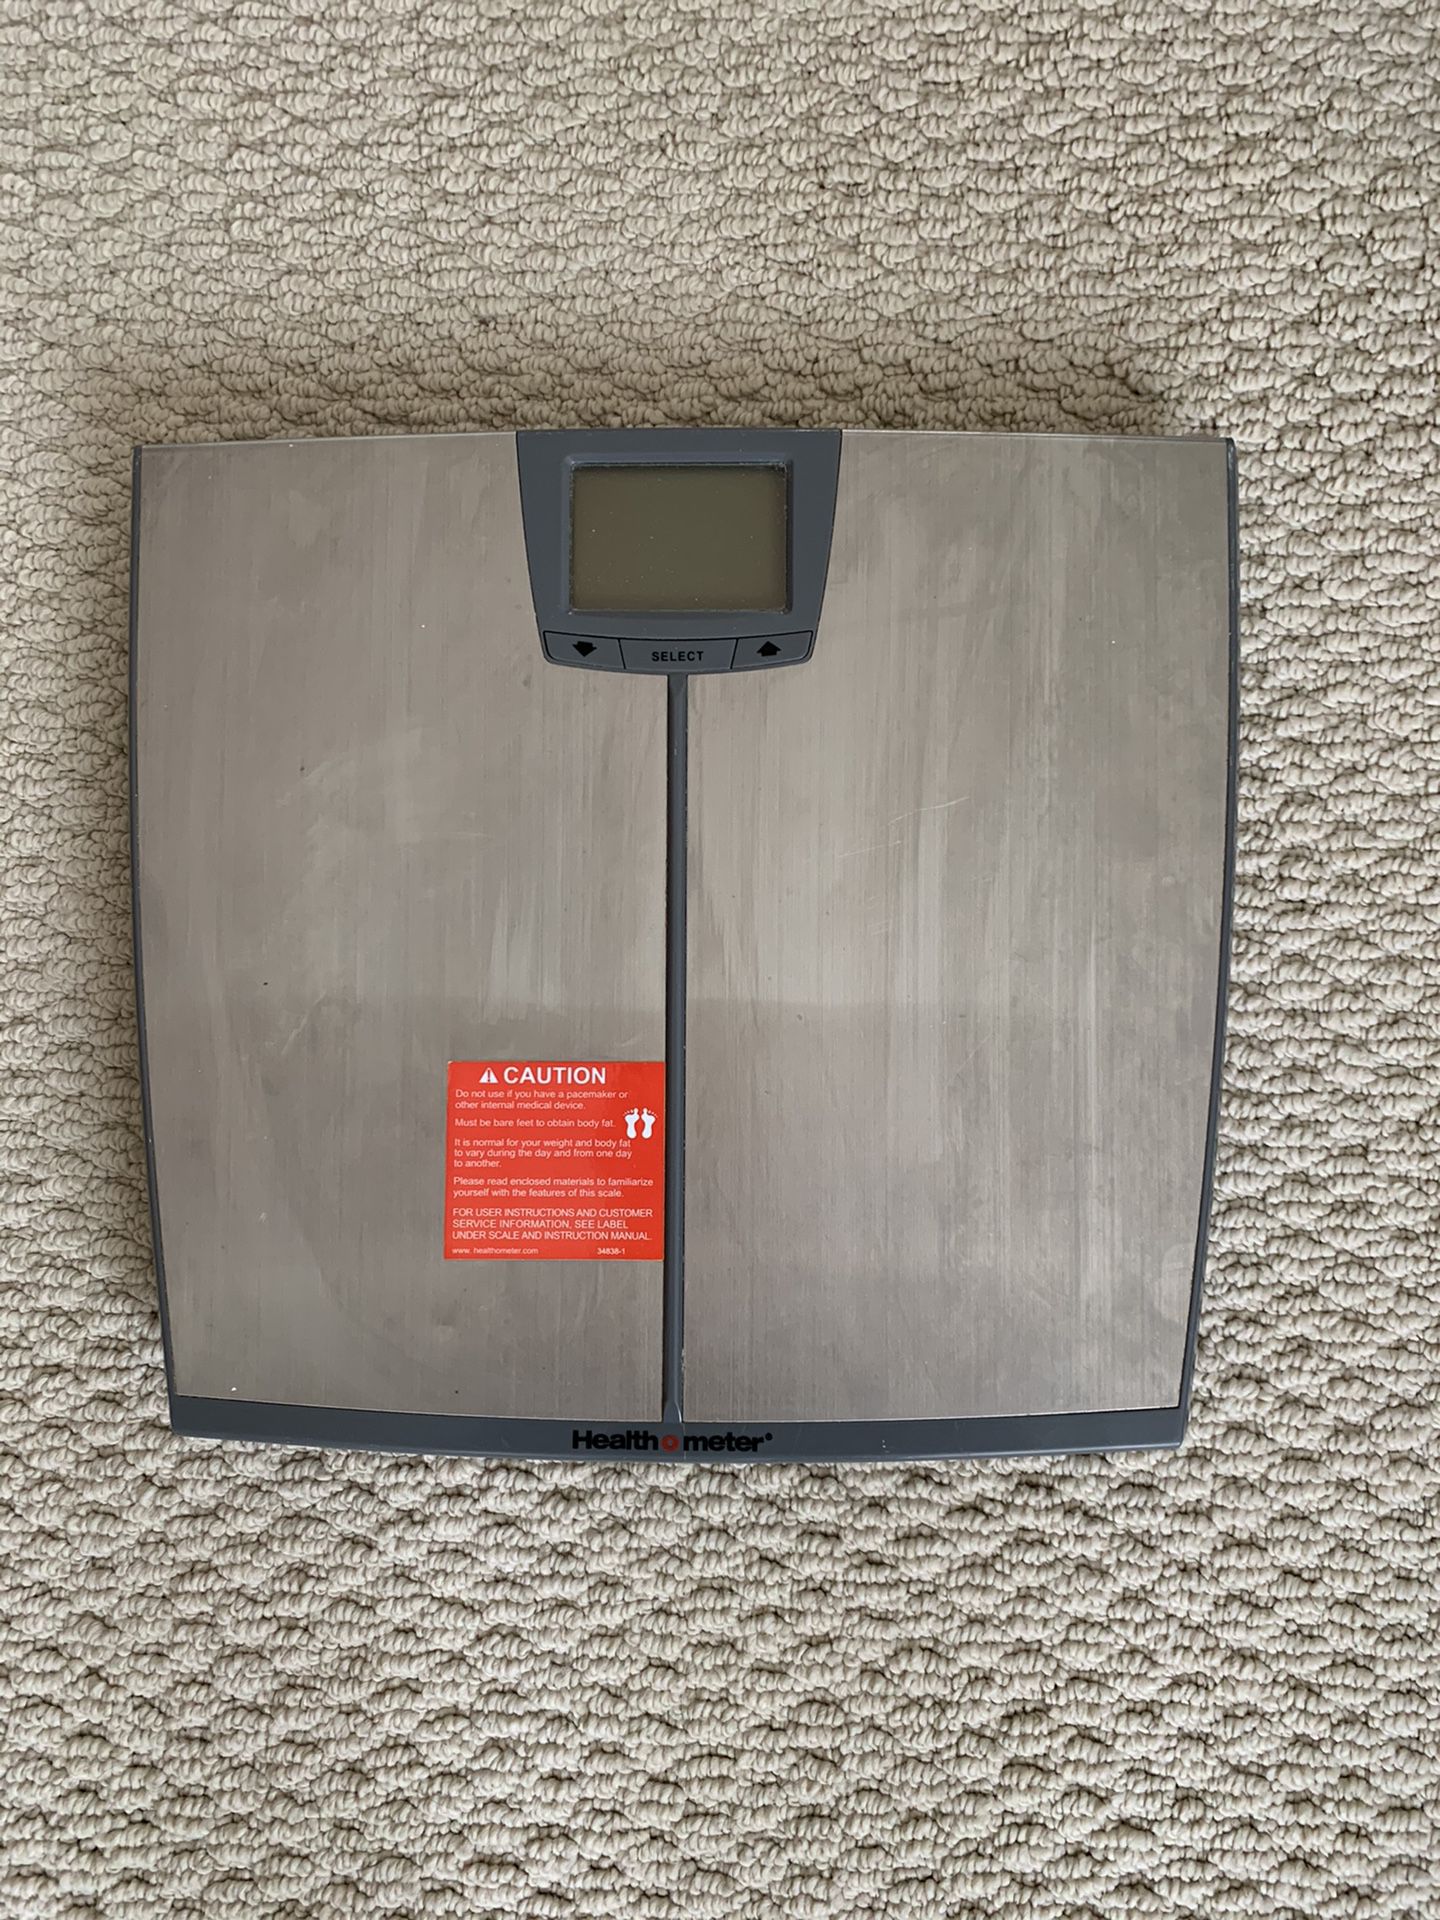 Health-o-meter body scale